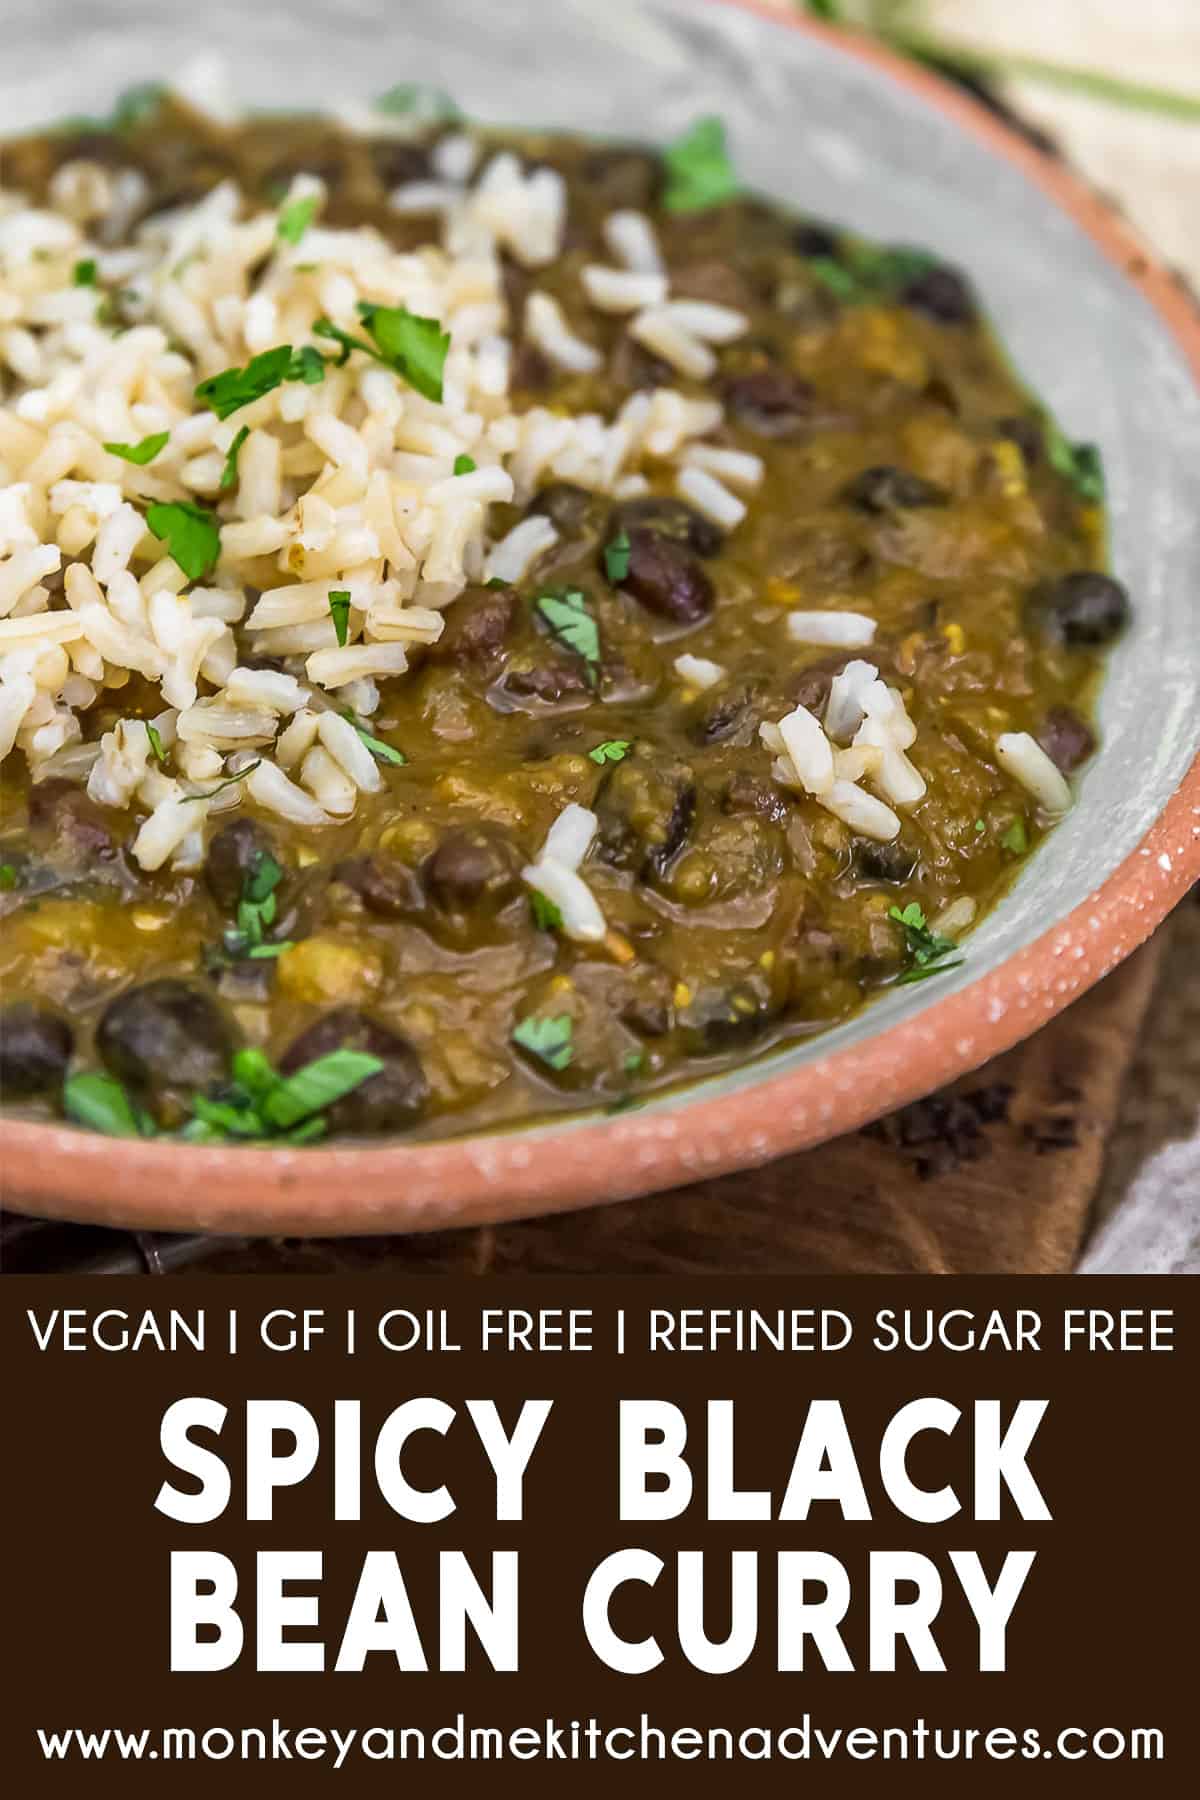 Spicy Black Bean Curry with text description